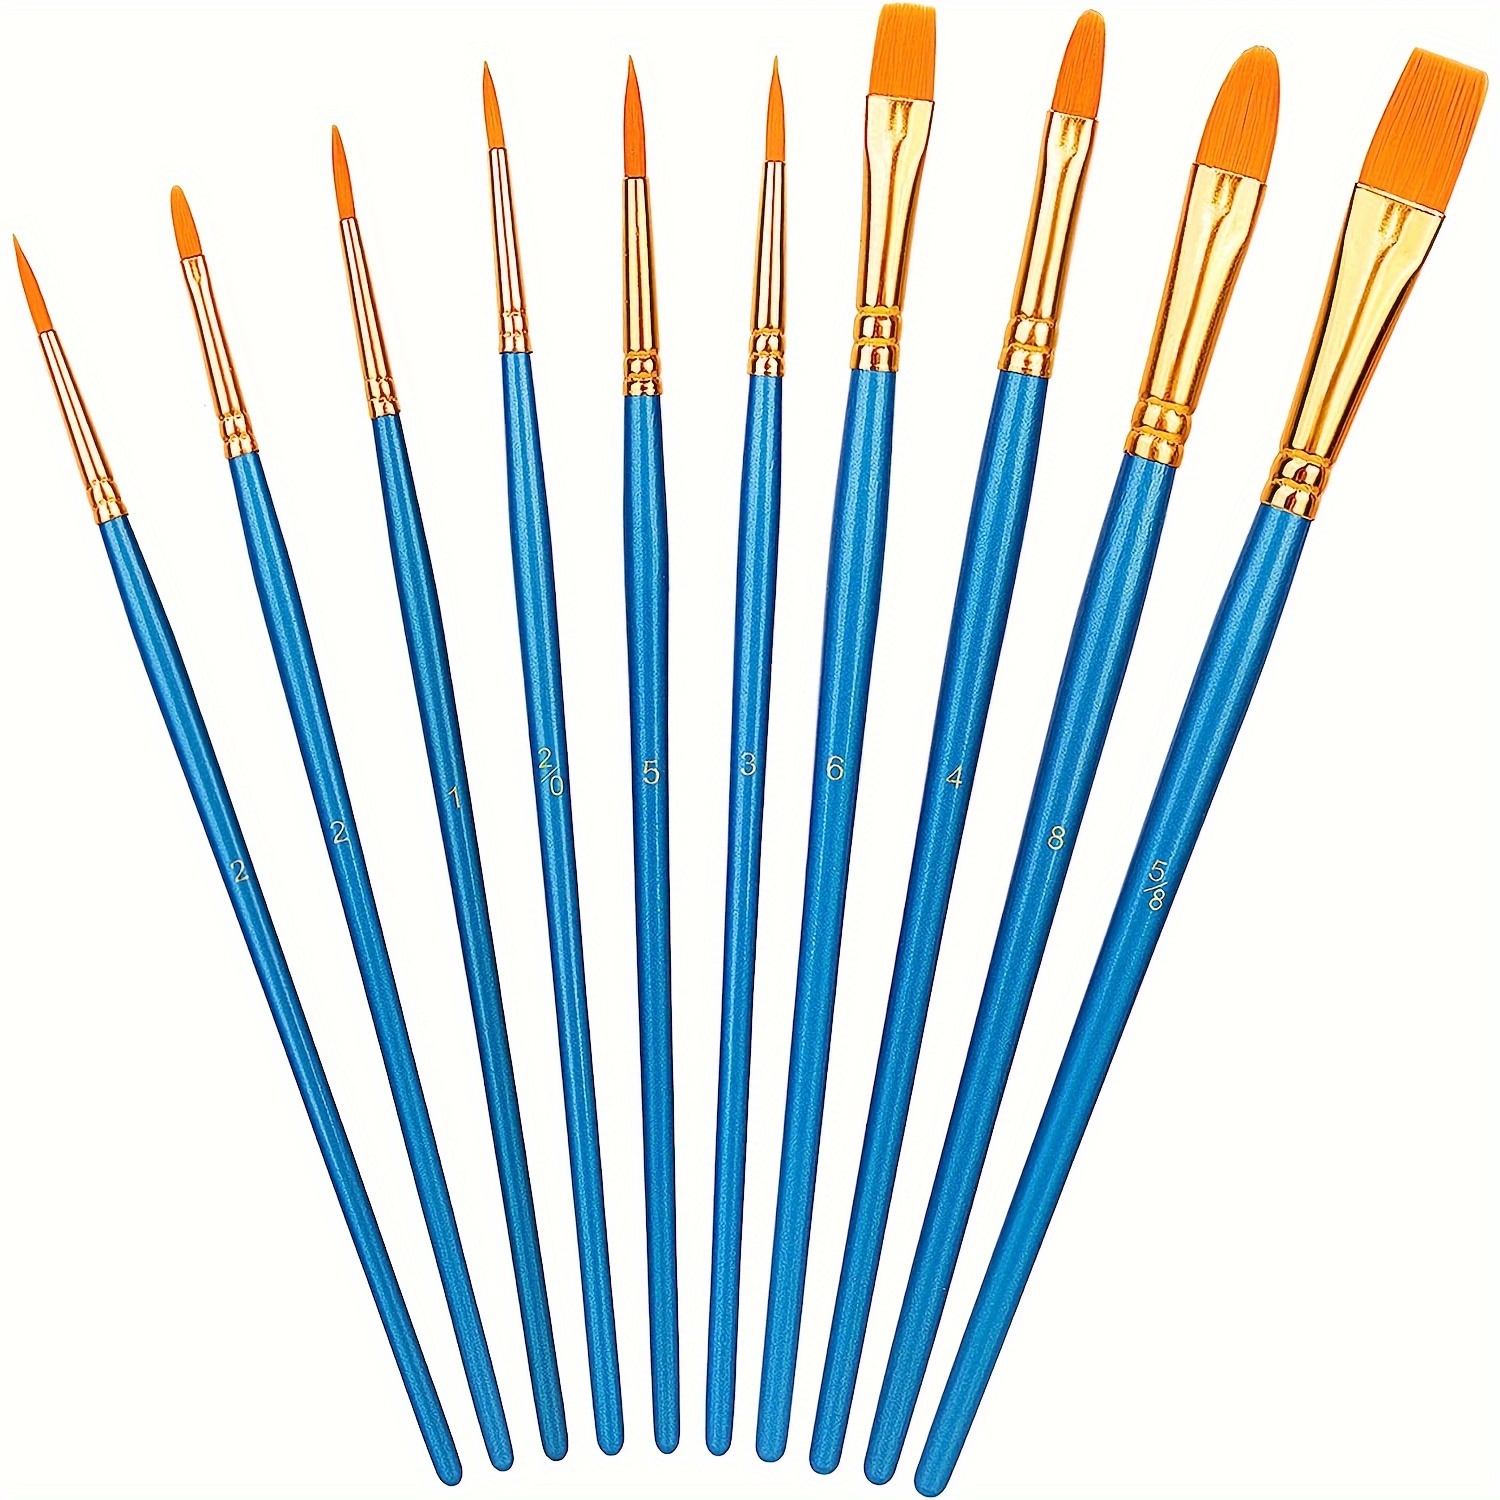 30 Pieces Paint Brushes Bulk Small Flat Top Paint Brush Acrylic Paint Brush Oil Classroom Painting Brush for Kids Students Artists Mini Paint Brushes